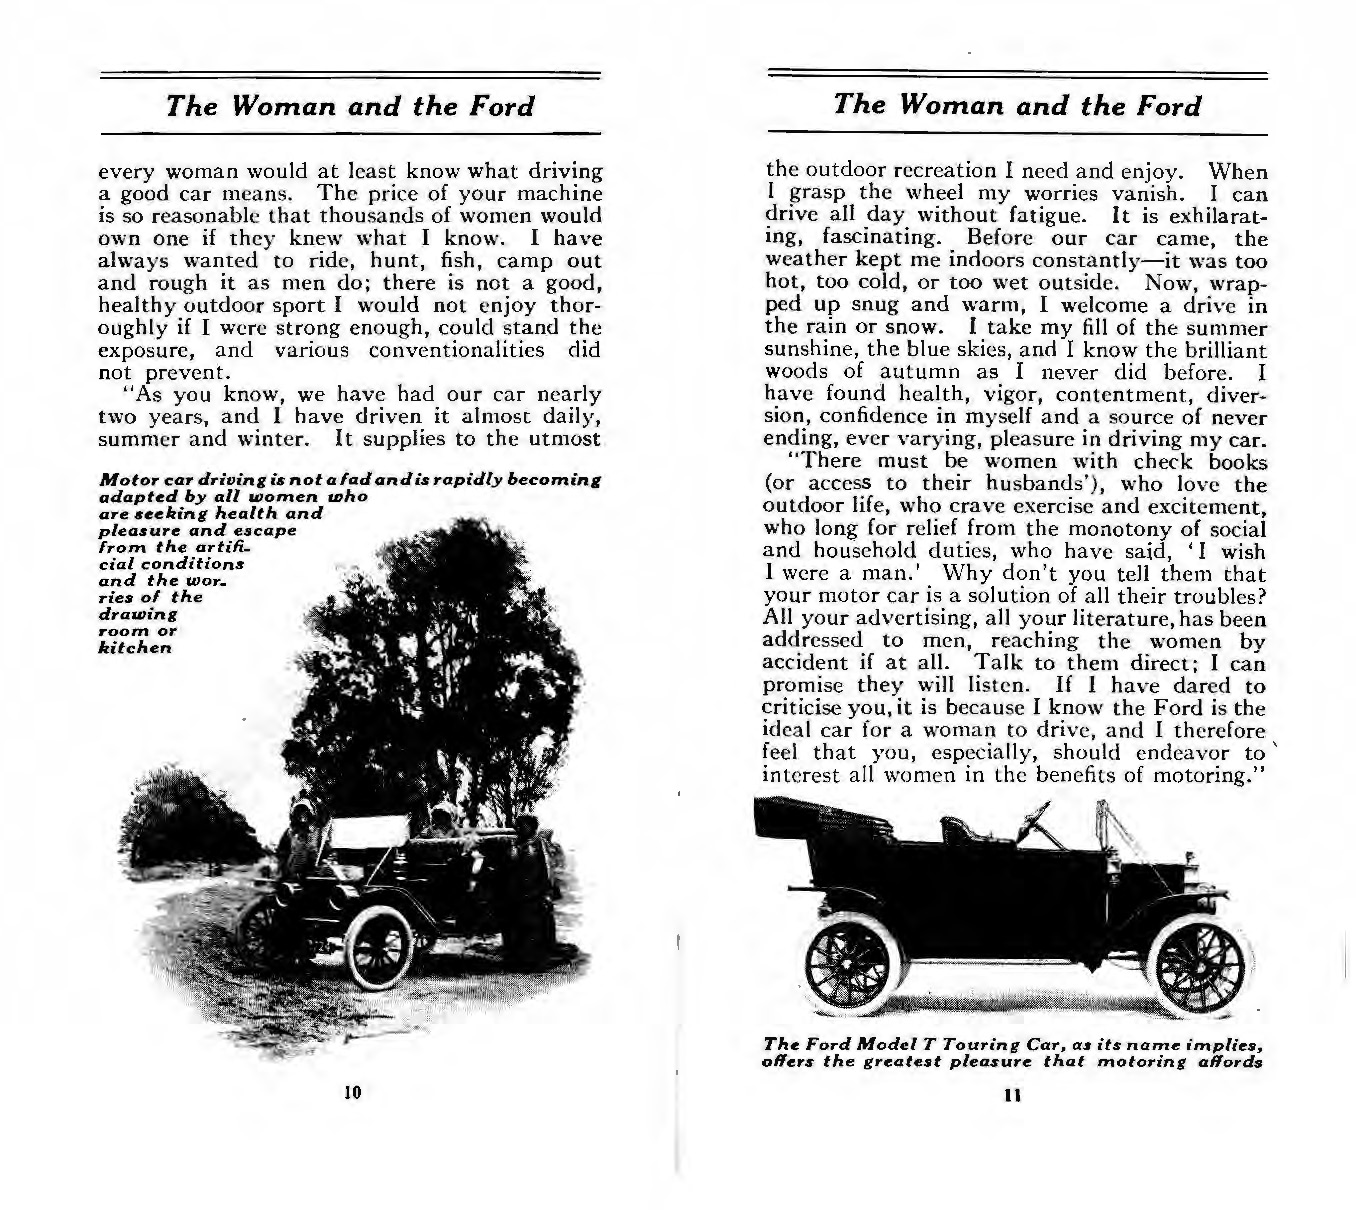 1912_The_Woman__the_Ford-10-11